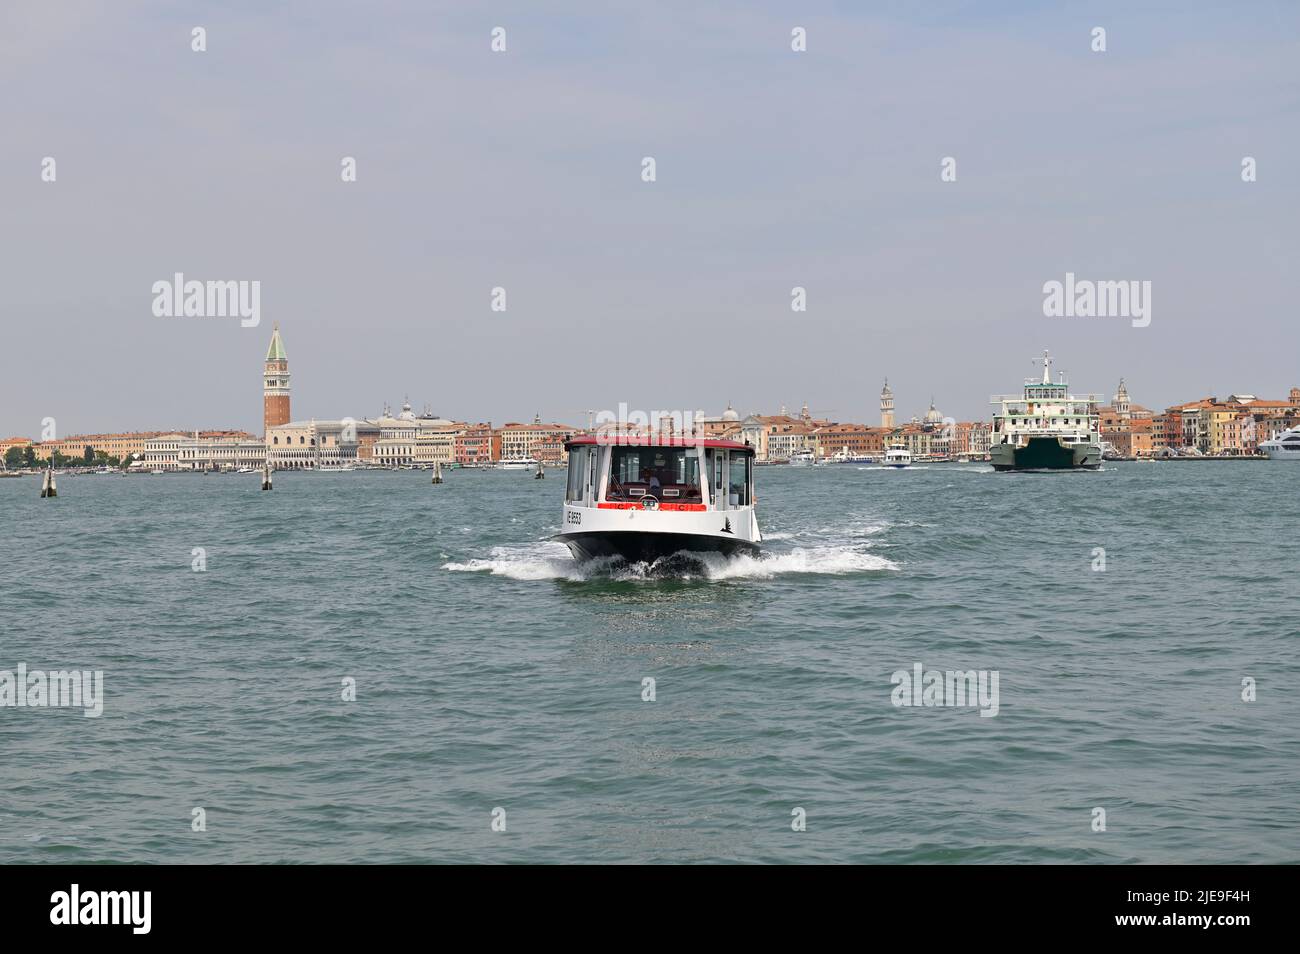 Venice, Italy. June 17, 2022. Entrance to the Venice Lagoon. Water taxi and ferry in the background Stock Photo